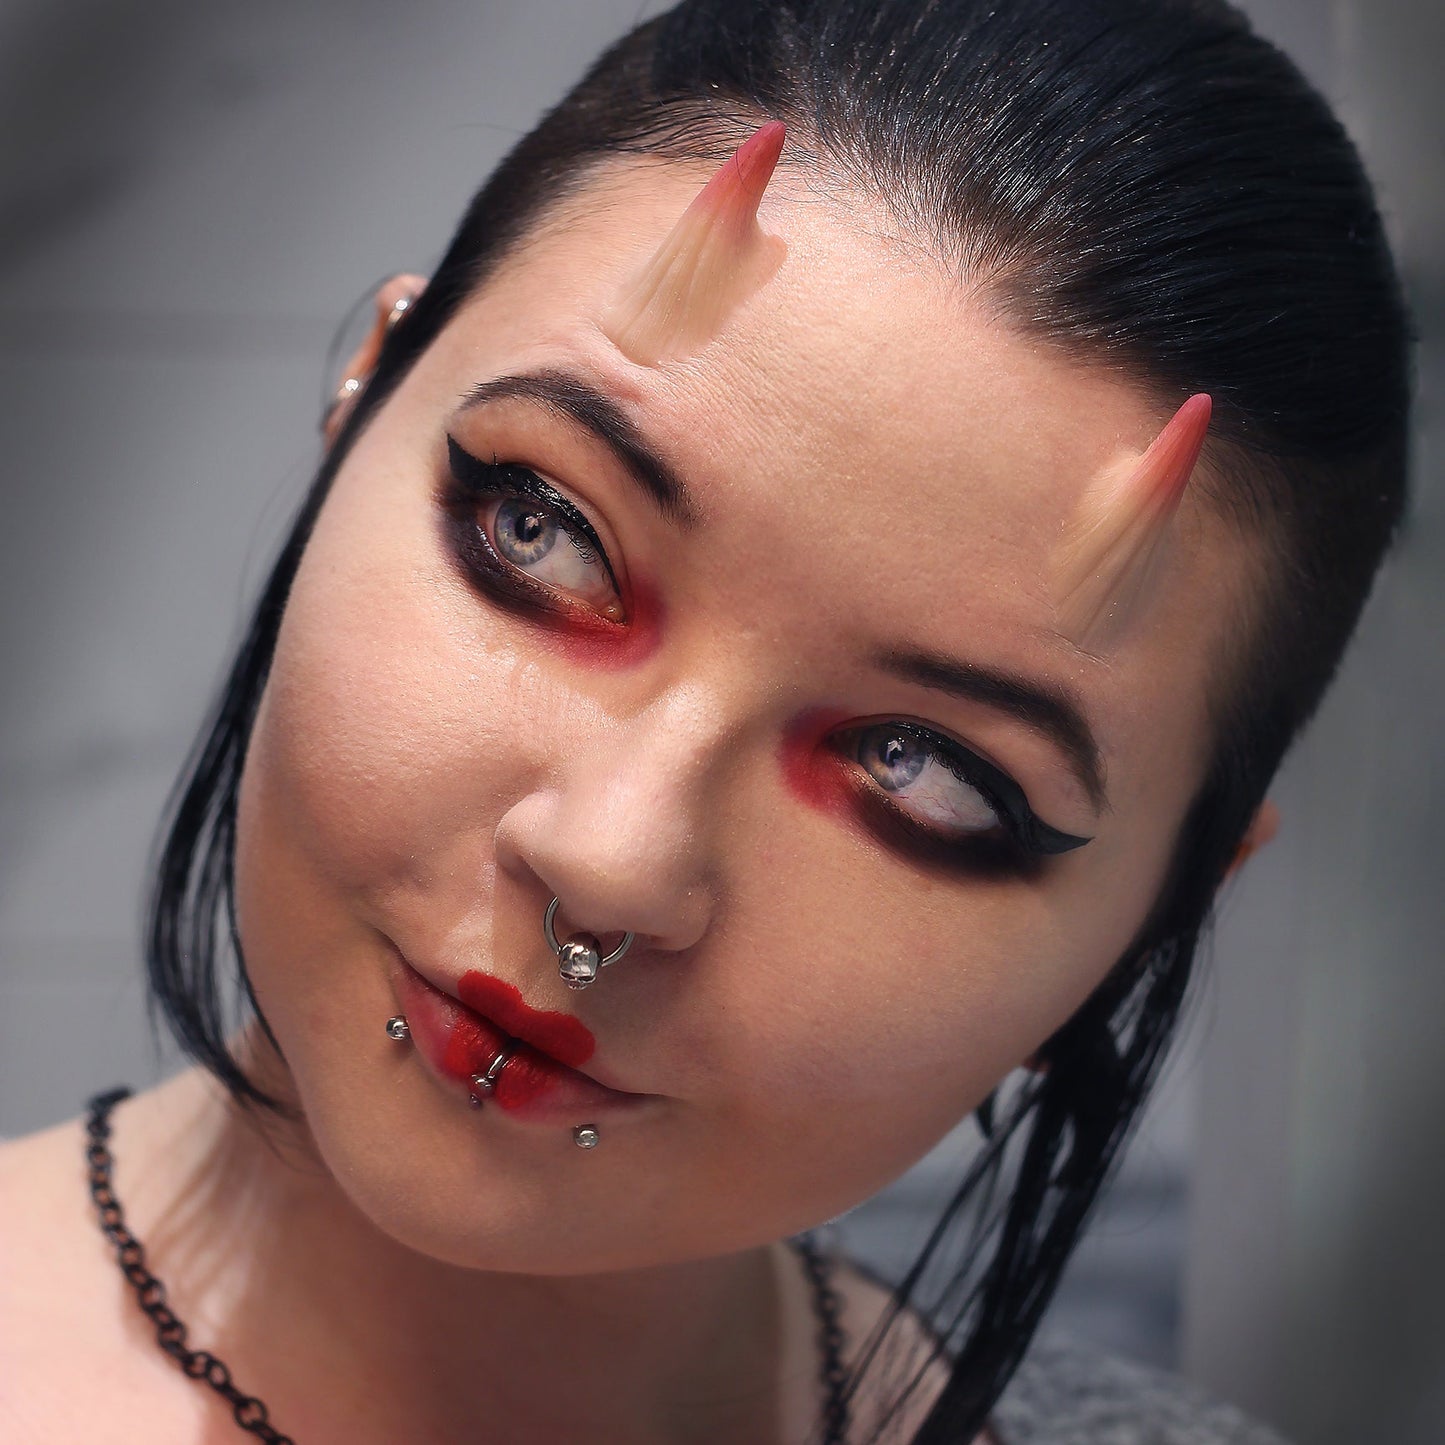 Woman with dark hair wearing red makeup and small vertical horns